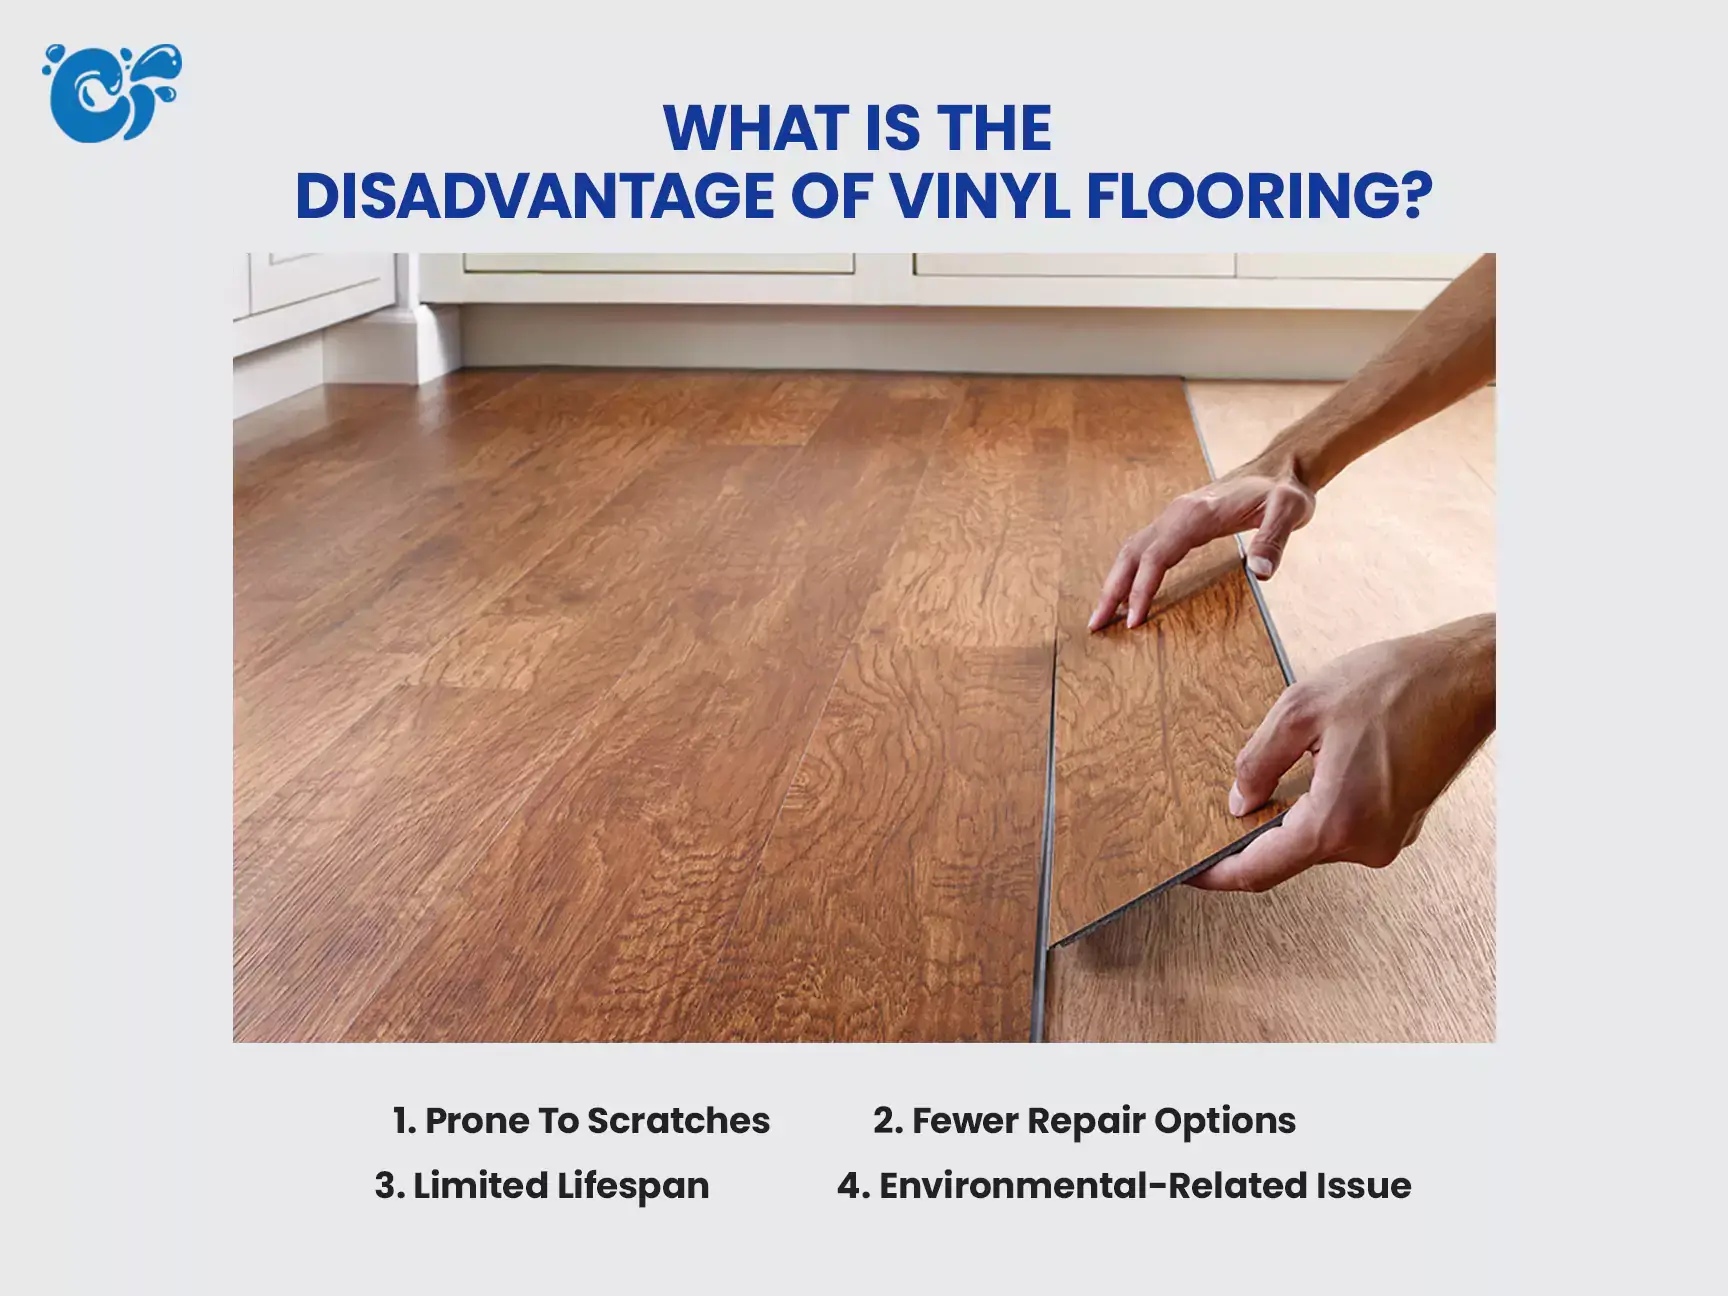 What Is The Disadvantage Of Vinyl Flooring?